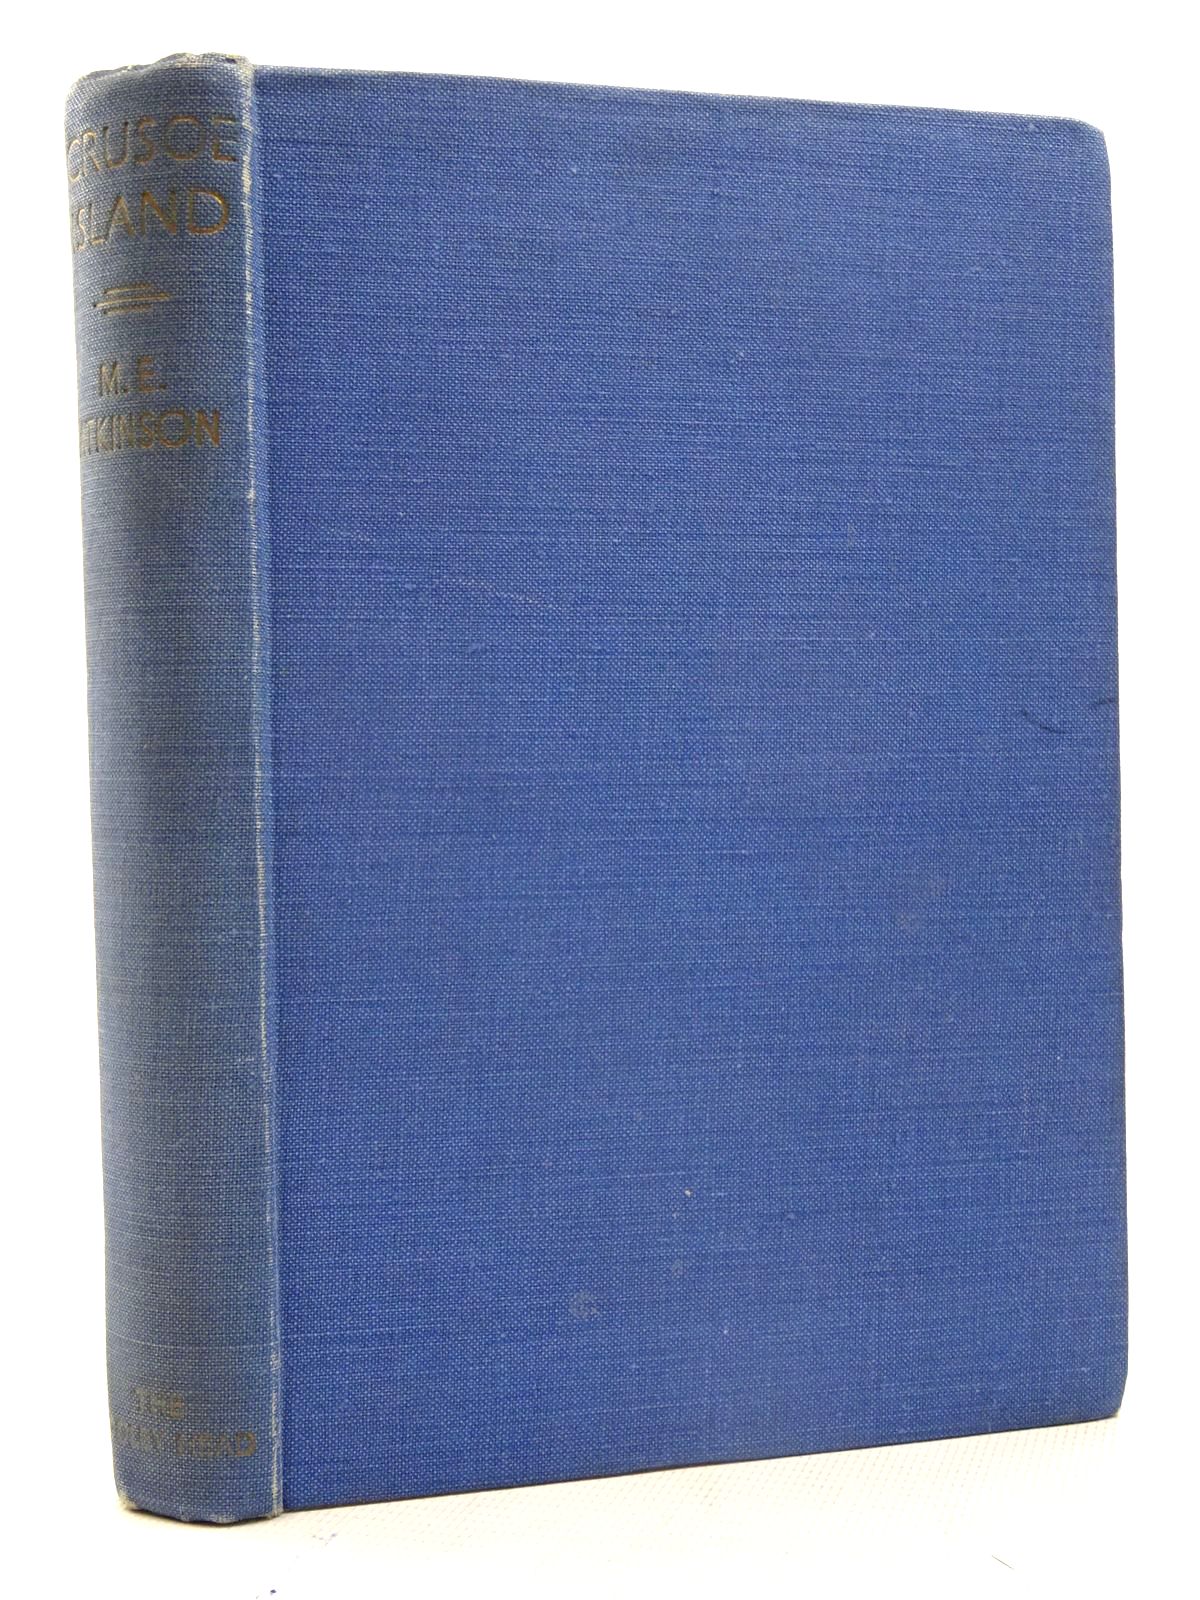 Photo of CRUSOE ISLAND written by Atkinson, M.E. illustrated by Jones, Harold published by John Lane The Bodley Head (STOCK CODE: 2125703)  for sale by Stella & Rose's Books